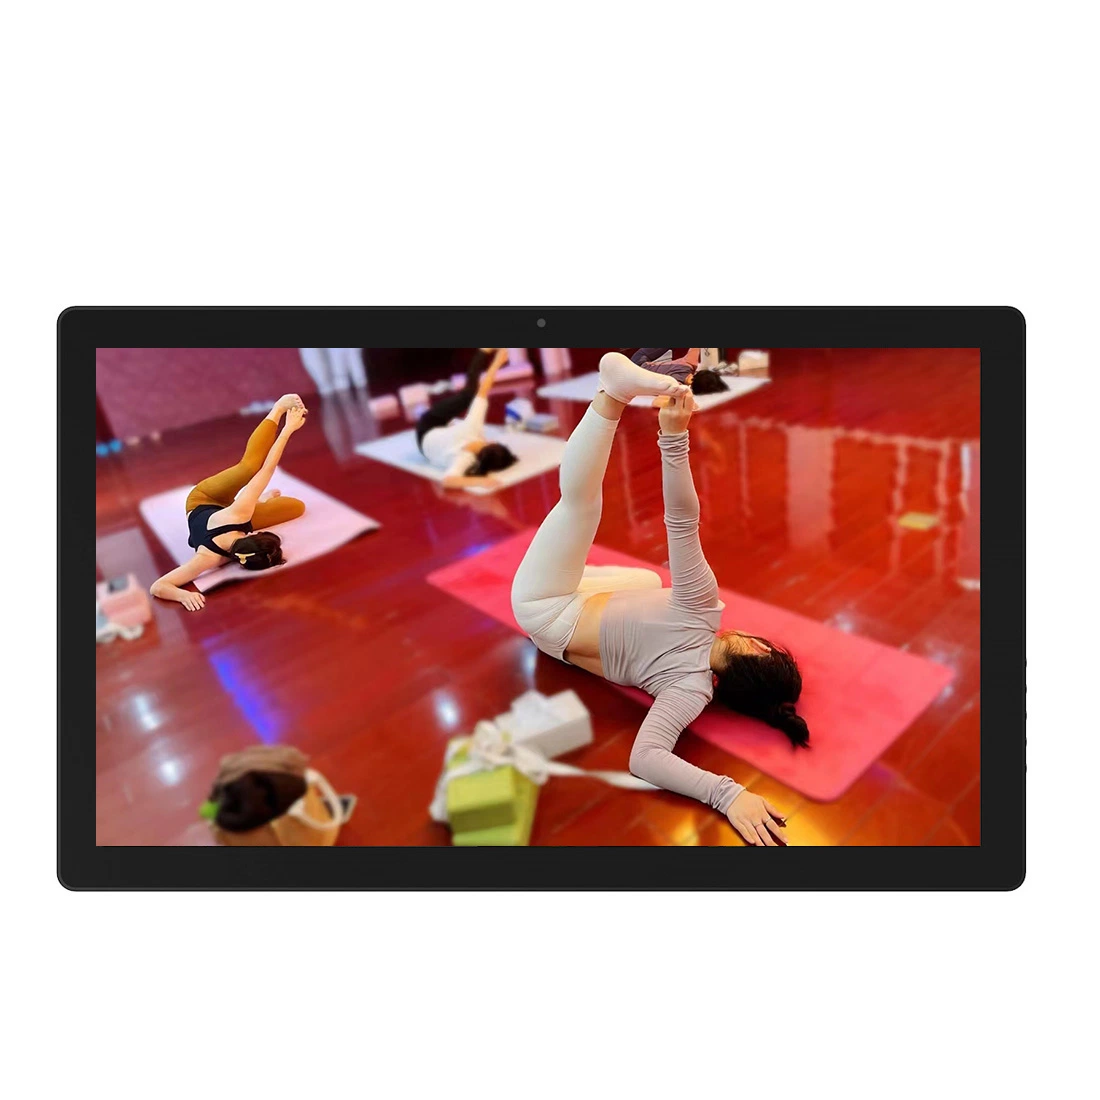 Vesa Mount Wall Mount Android/Linux Tablet 18.5 Inch 21.5 Inch LCD Capacitive Touch Screen 2+16GB with RJ45 USB Poe NFC Function Rk3288/Rk3566 Tablet